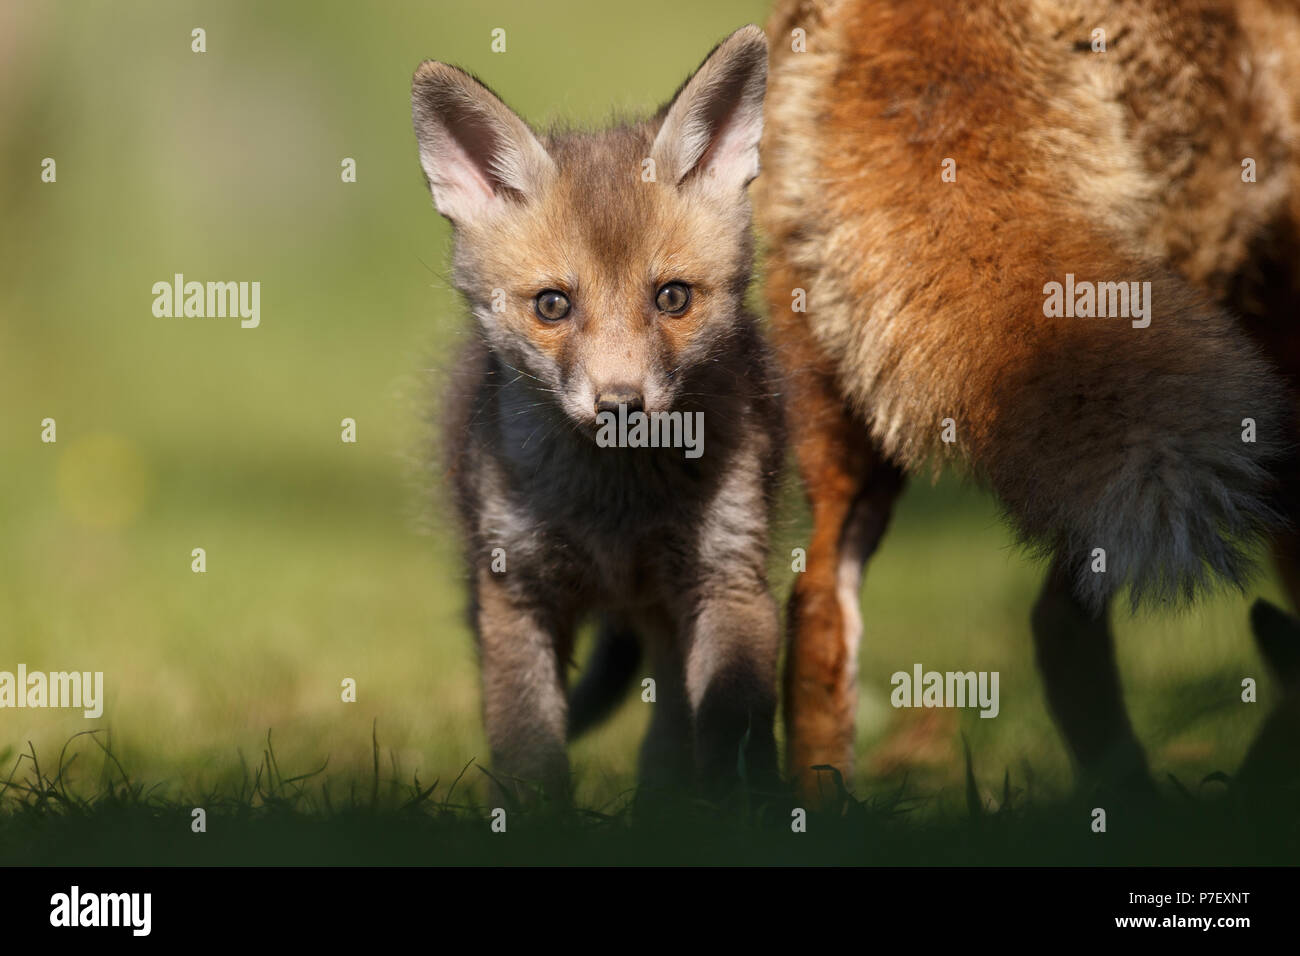 Red fox cub out exploring its new world Stock Photo